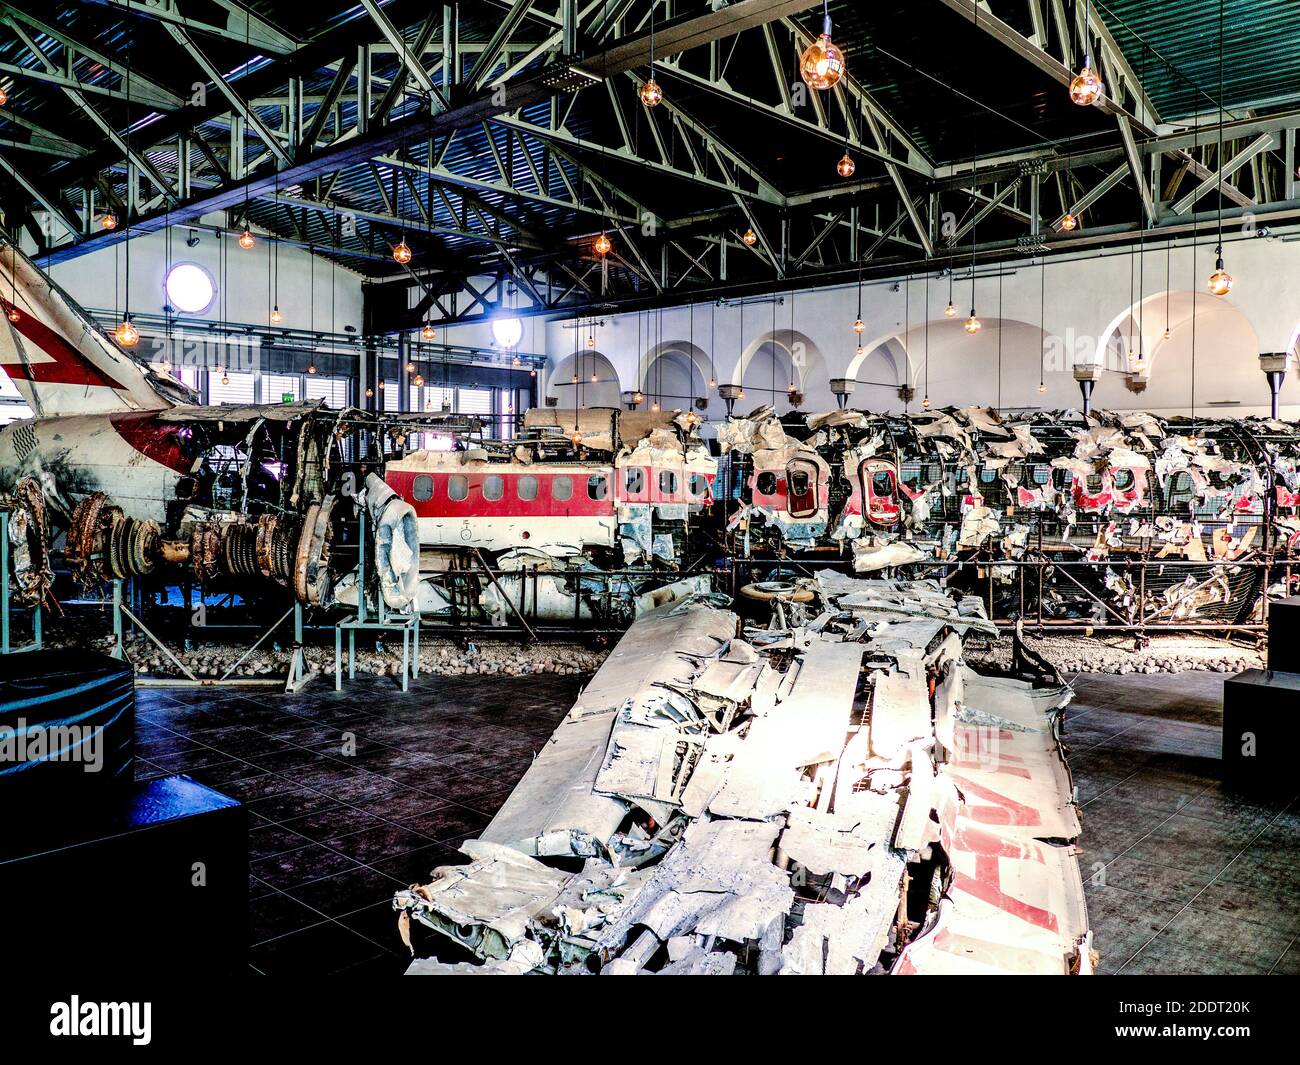 Museum for the Memory of Ustica in Bologna which houses the wreck of the DC9 plane shot down on June 27, 1980. Italy Stock Photo